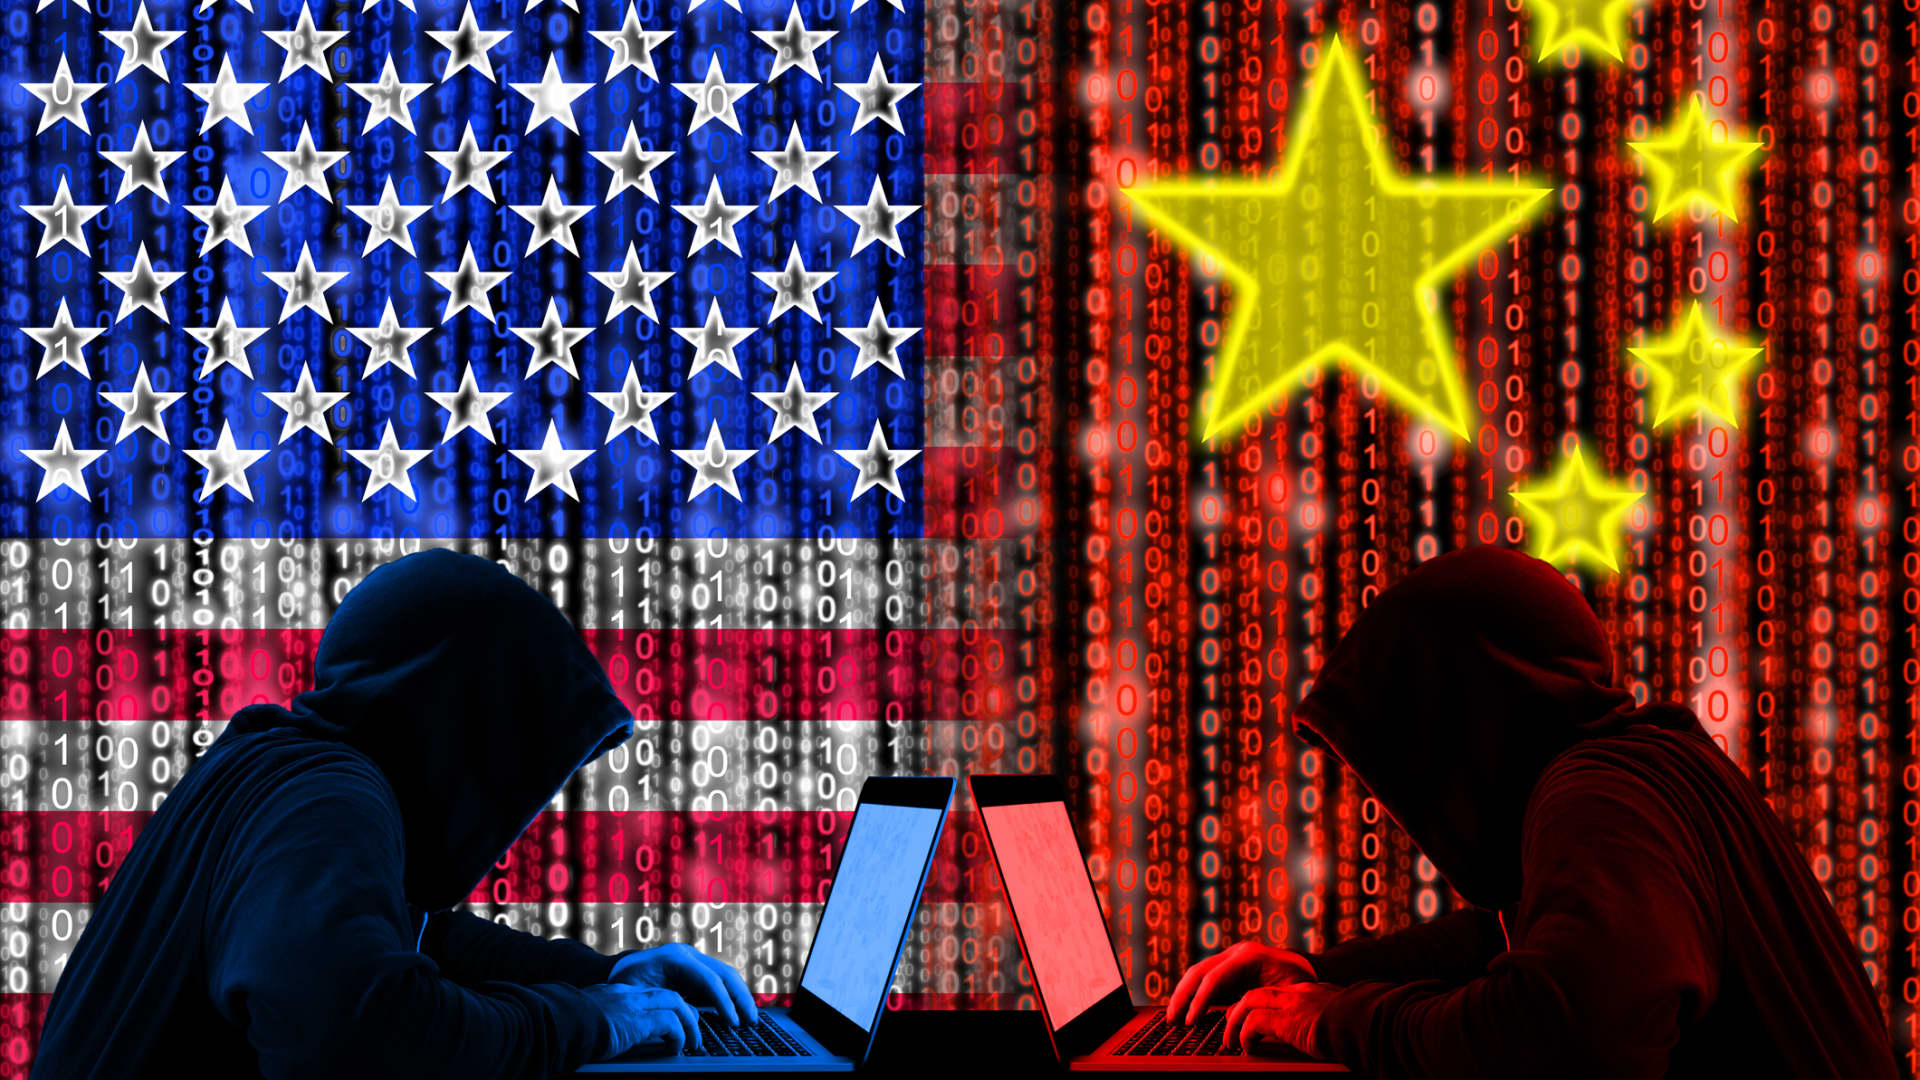 U.S. NSA hacked China's telecommunications networks, state media claims